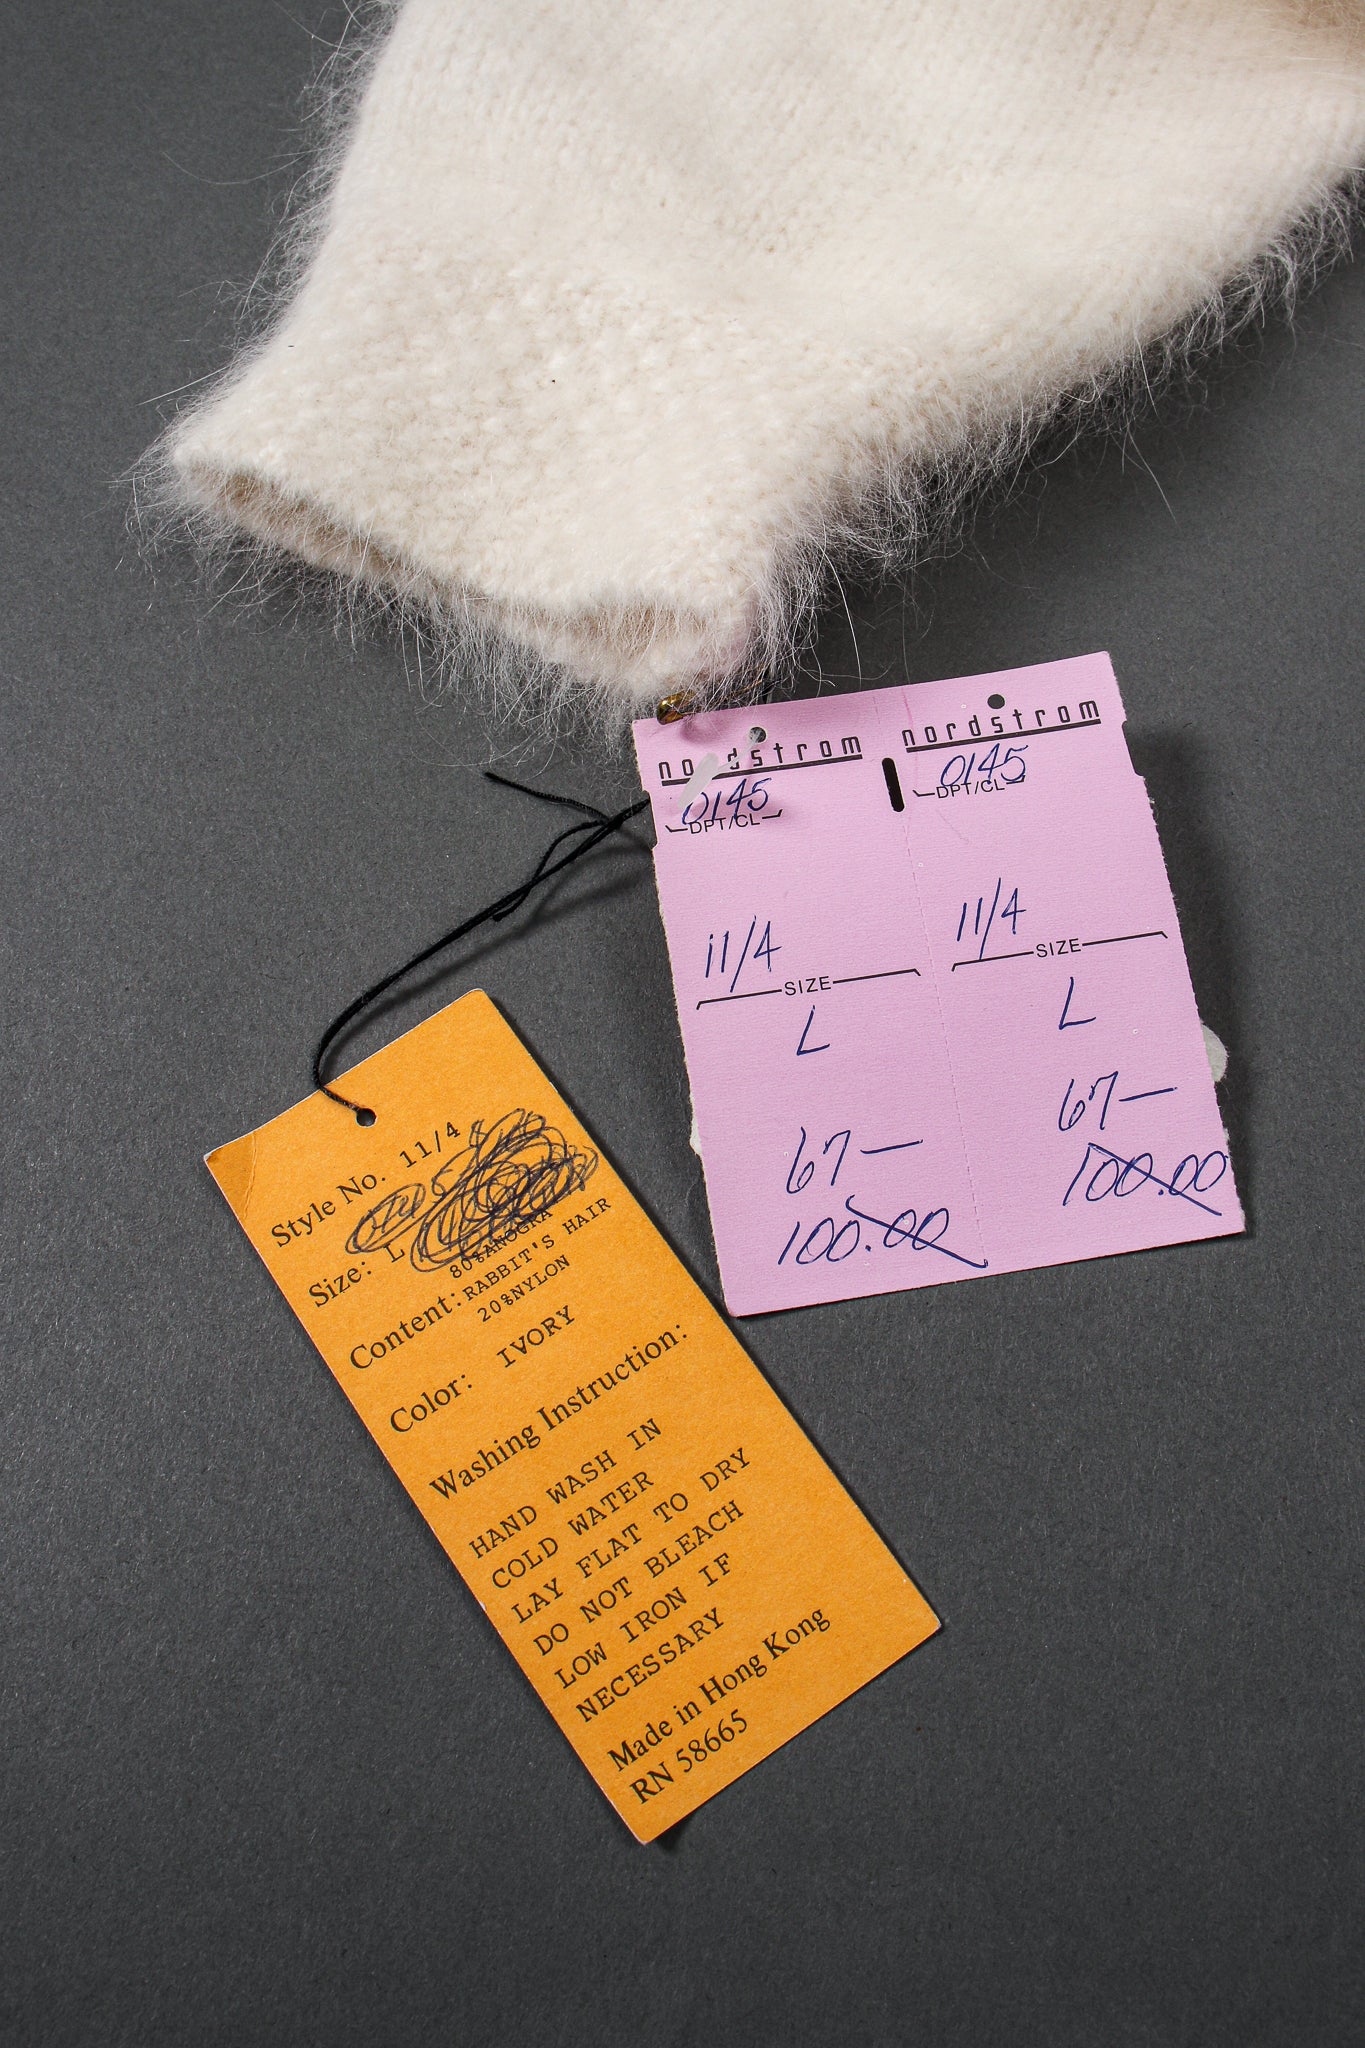 Vintage Classiques Lace Angora Sweater tags at Recess Los Angeles